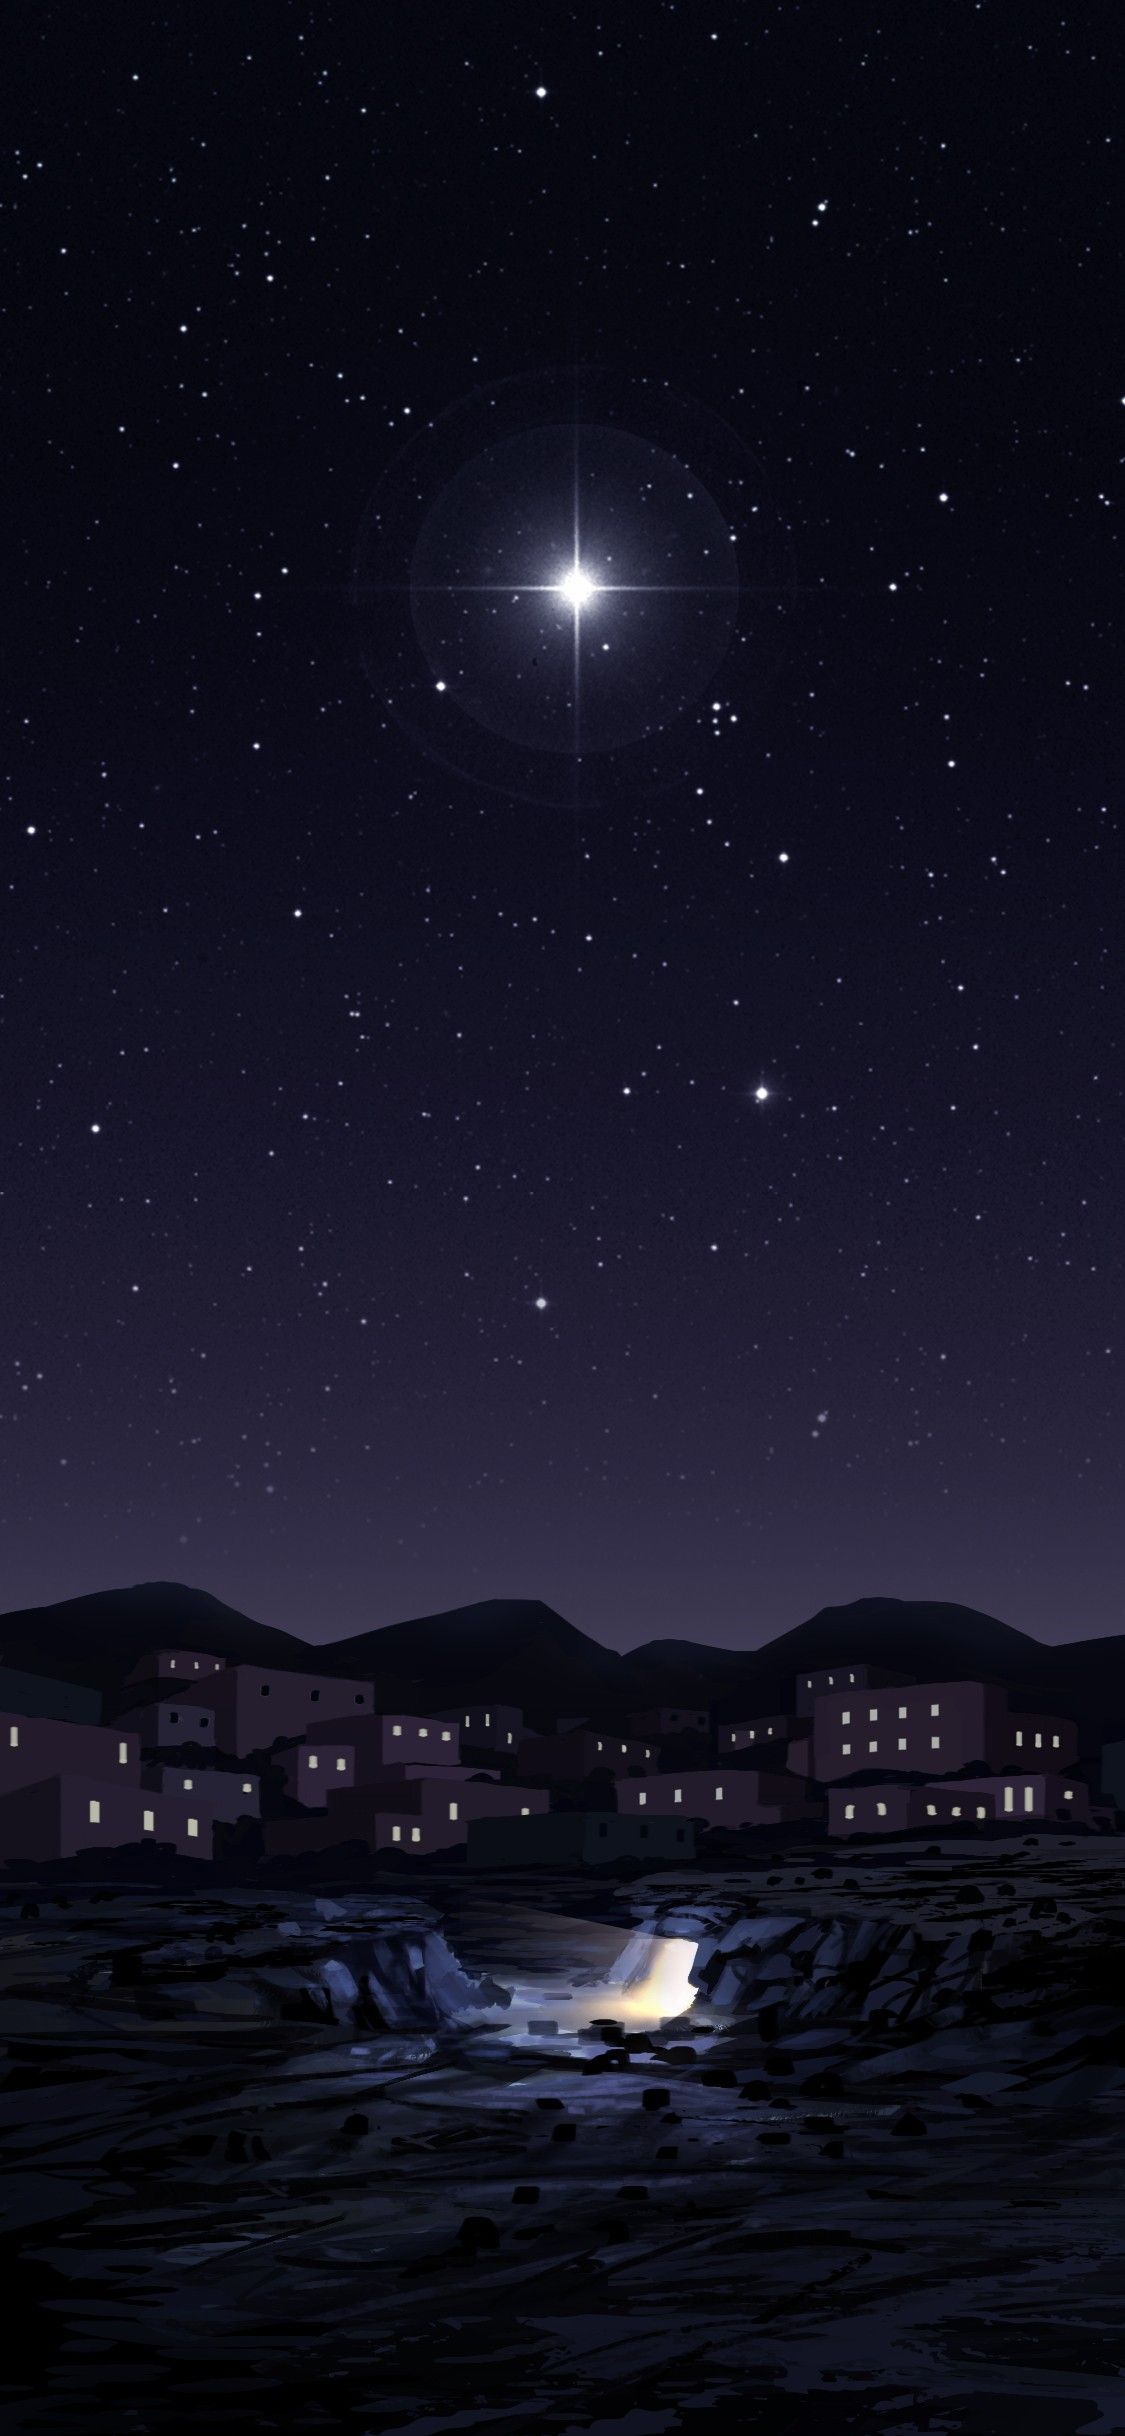 A star shines over the city at night - Jesus